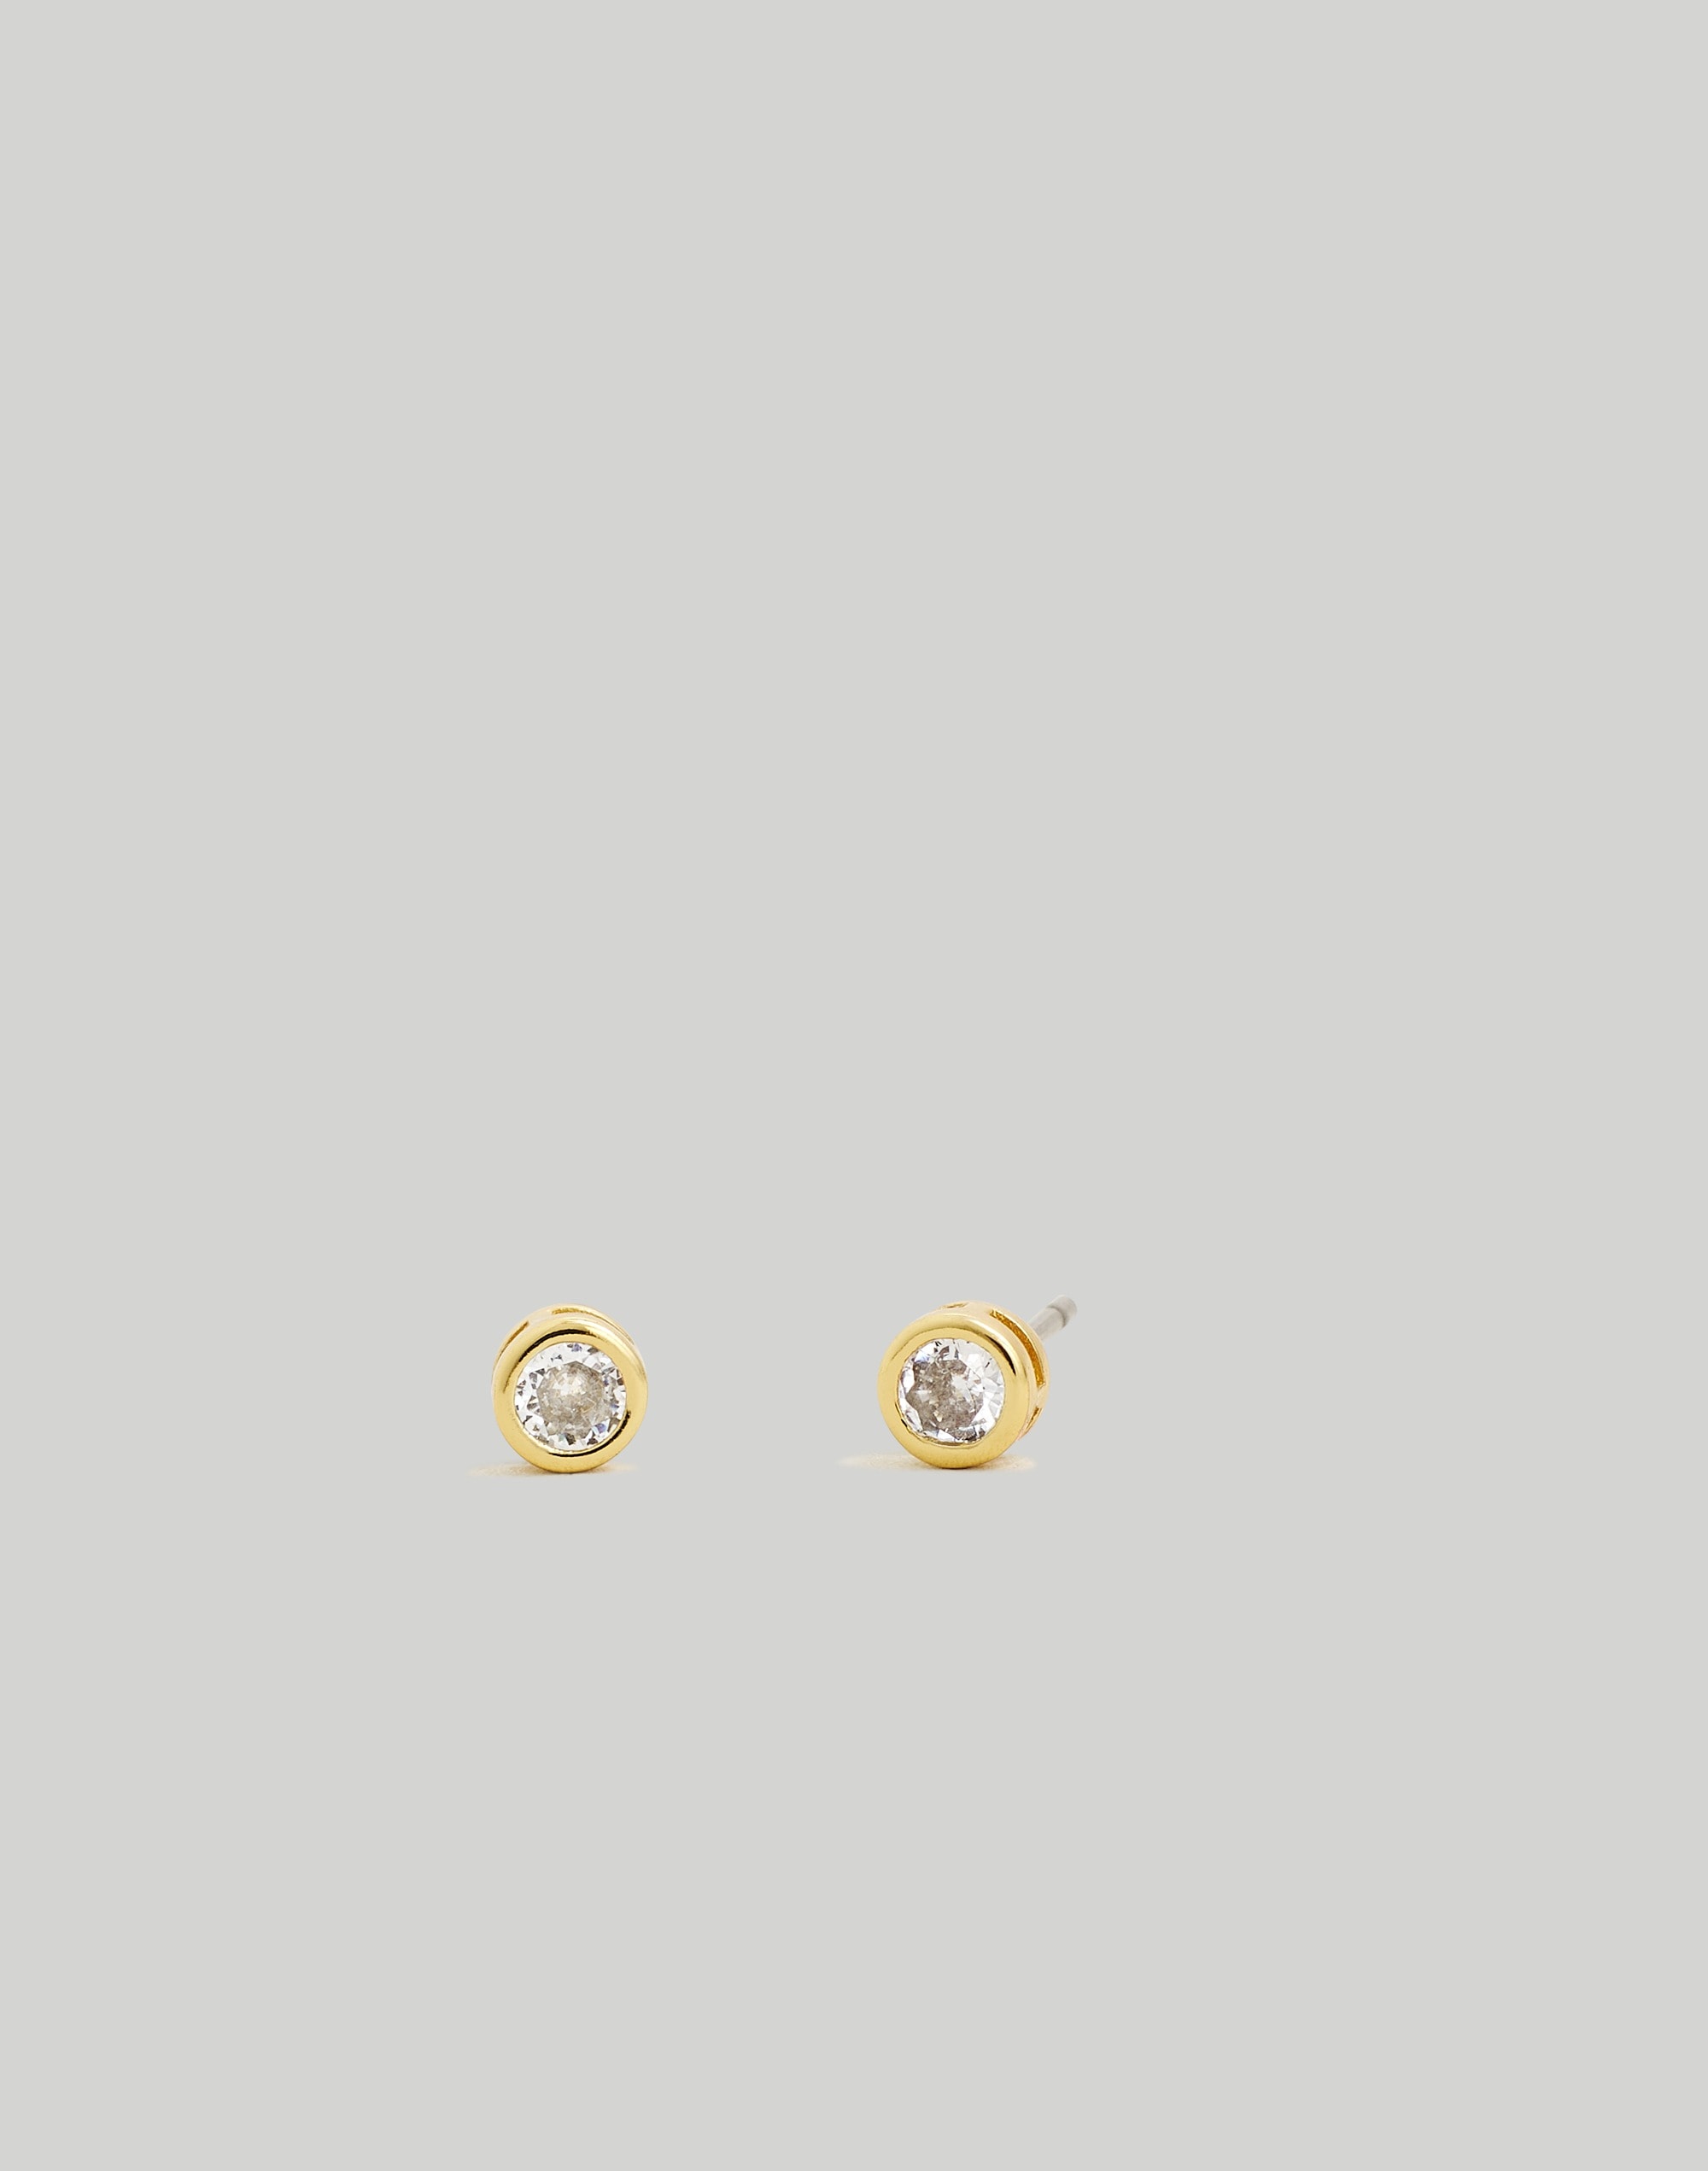 Mw The Tennis Collection Bezel Set Crystal Stud Earrings In Gold